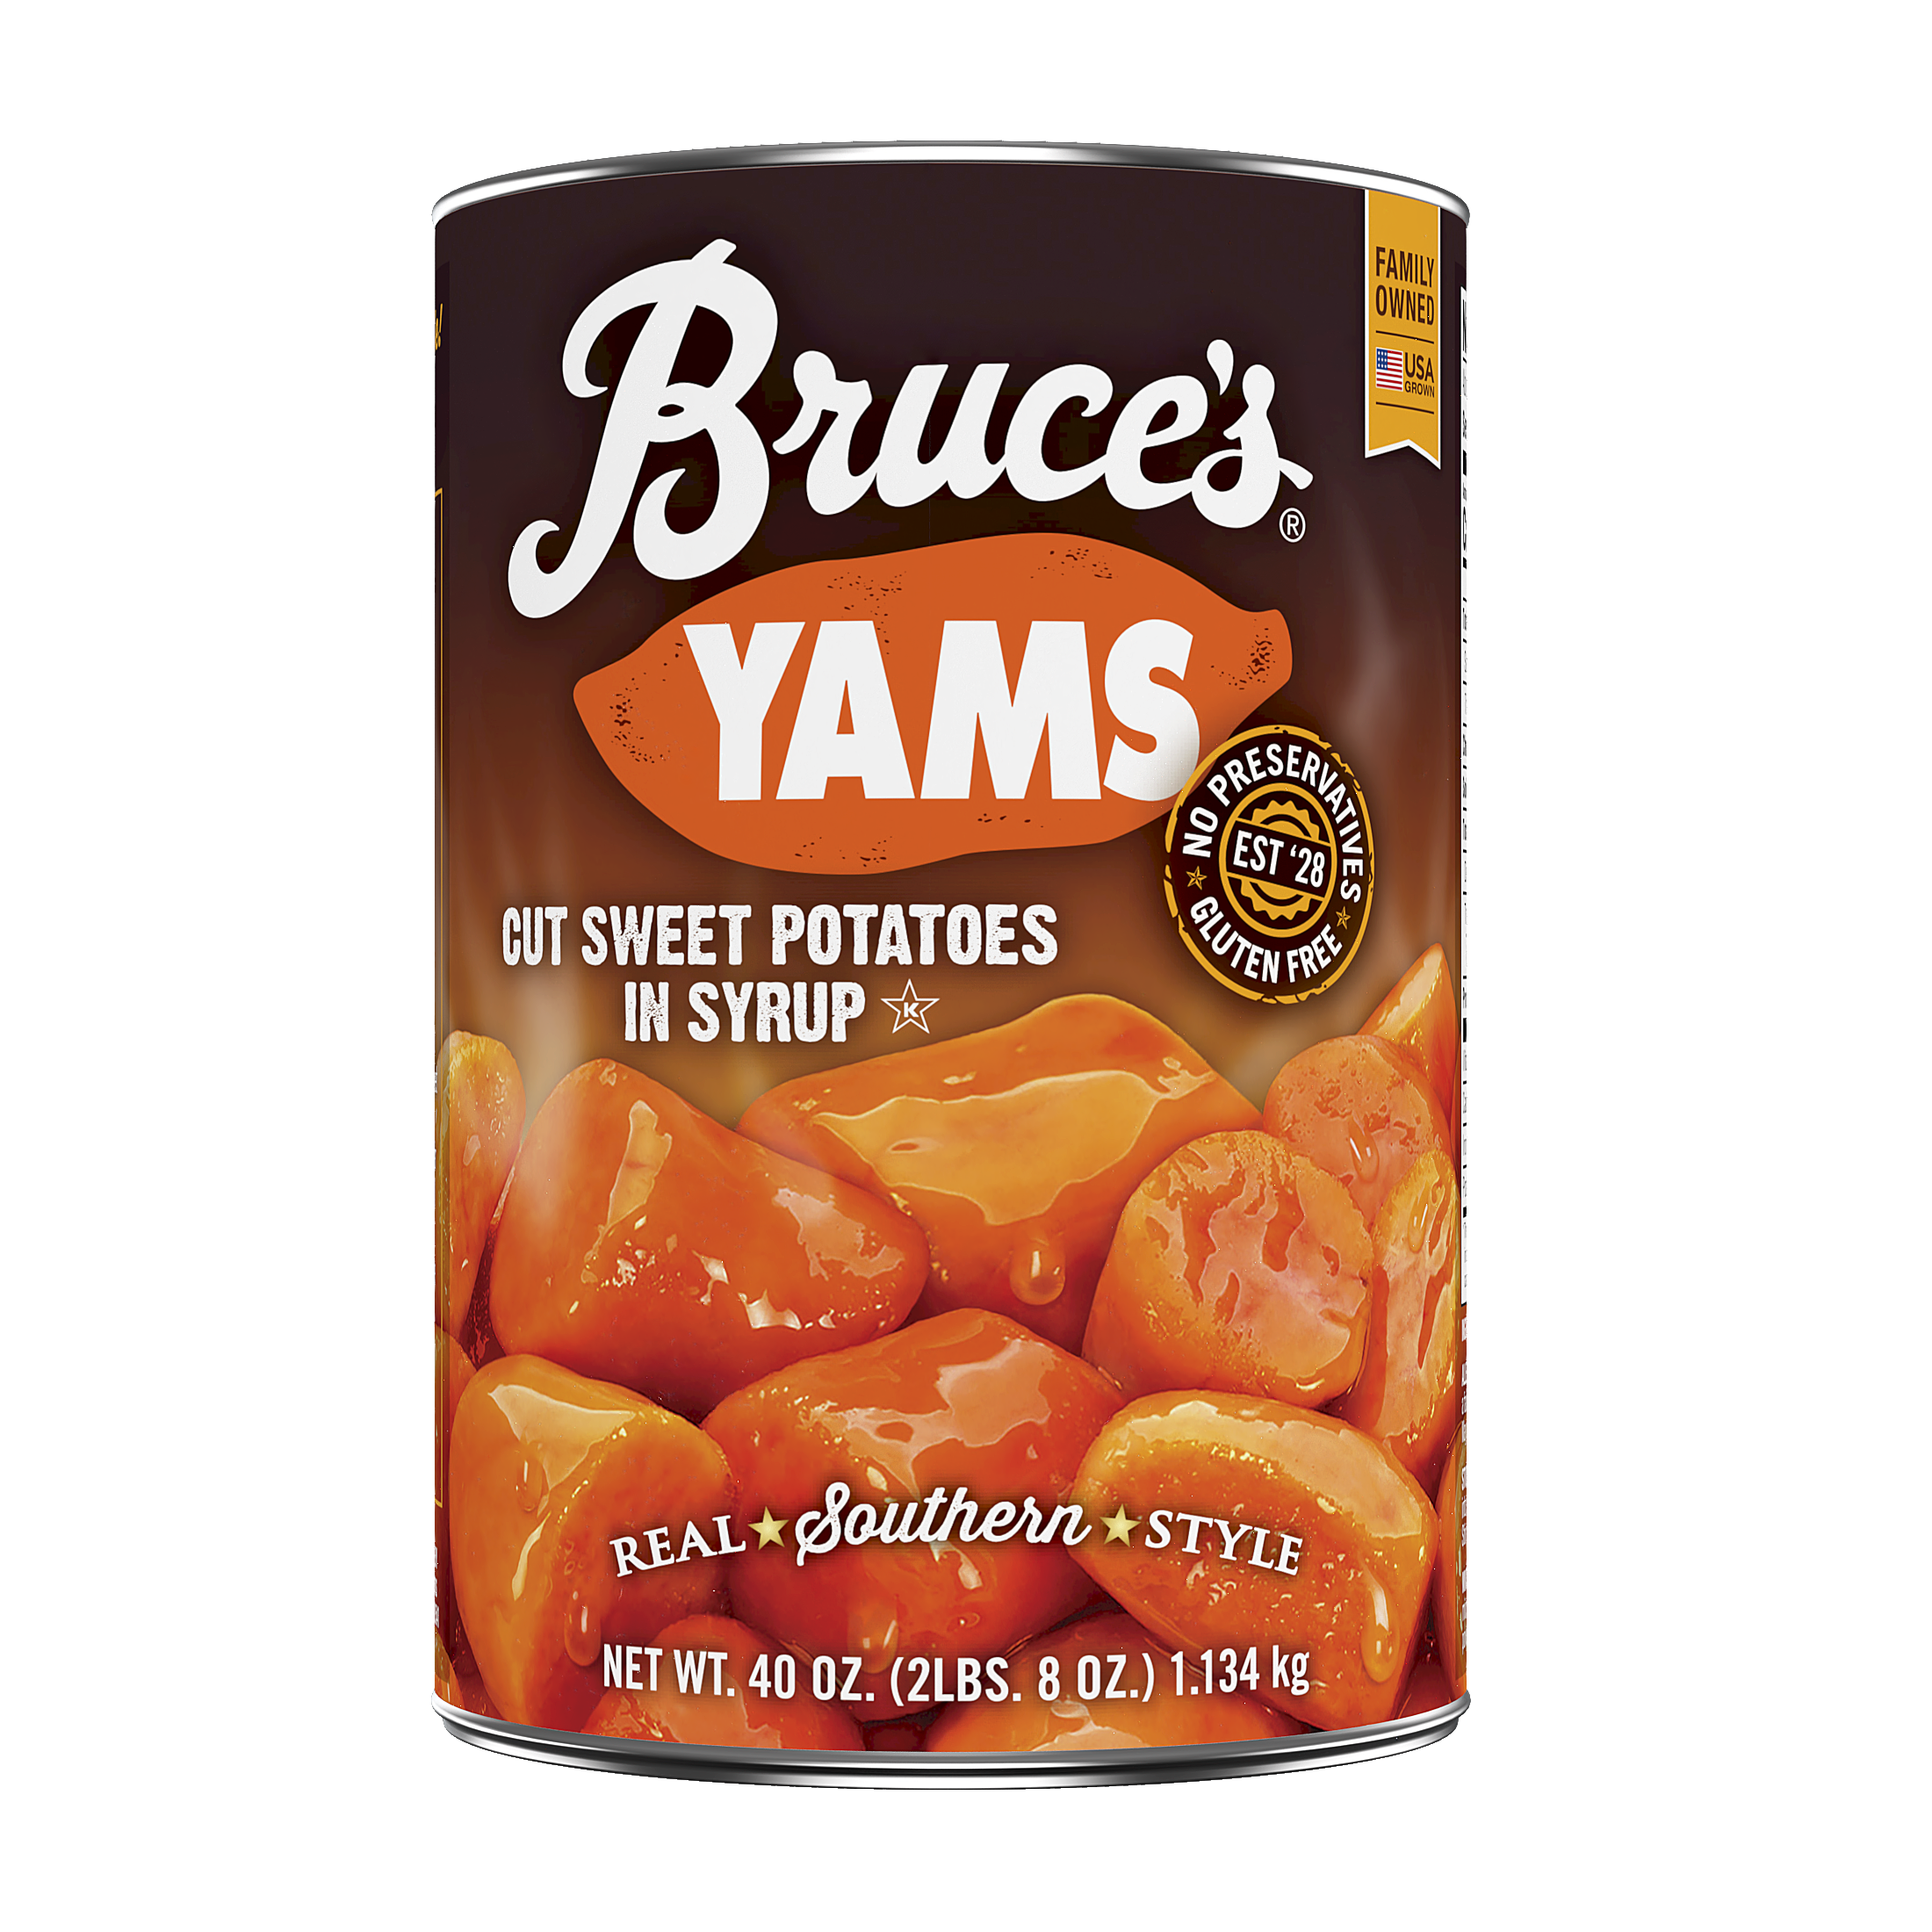 Bruce's Yams Cut Sweet Potatoes in Syrup, Canned Vegetables, 40 oz - image 1 of 6